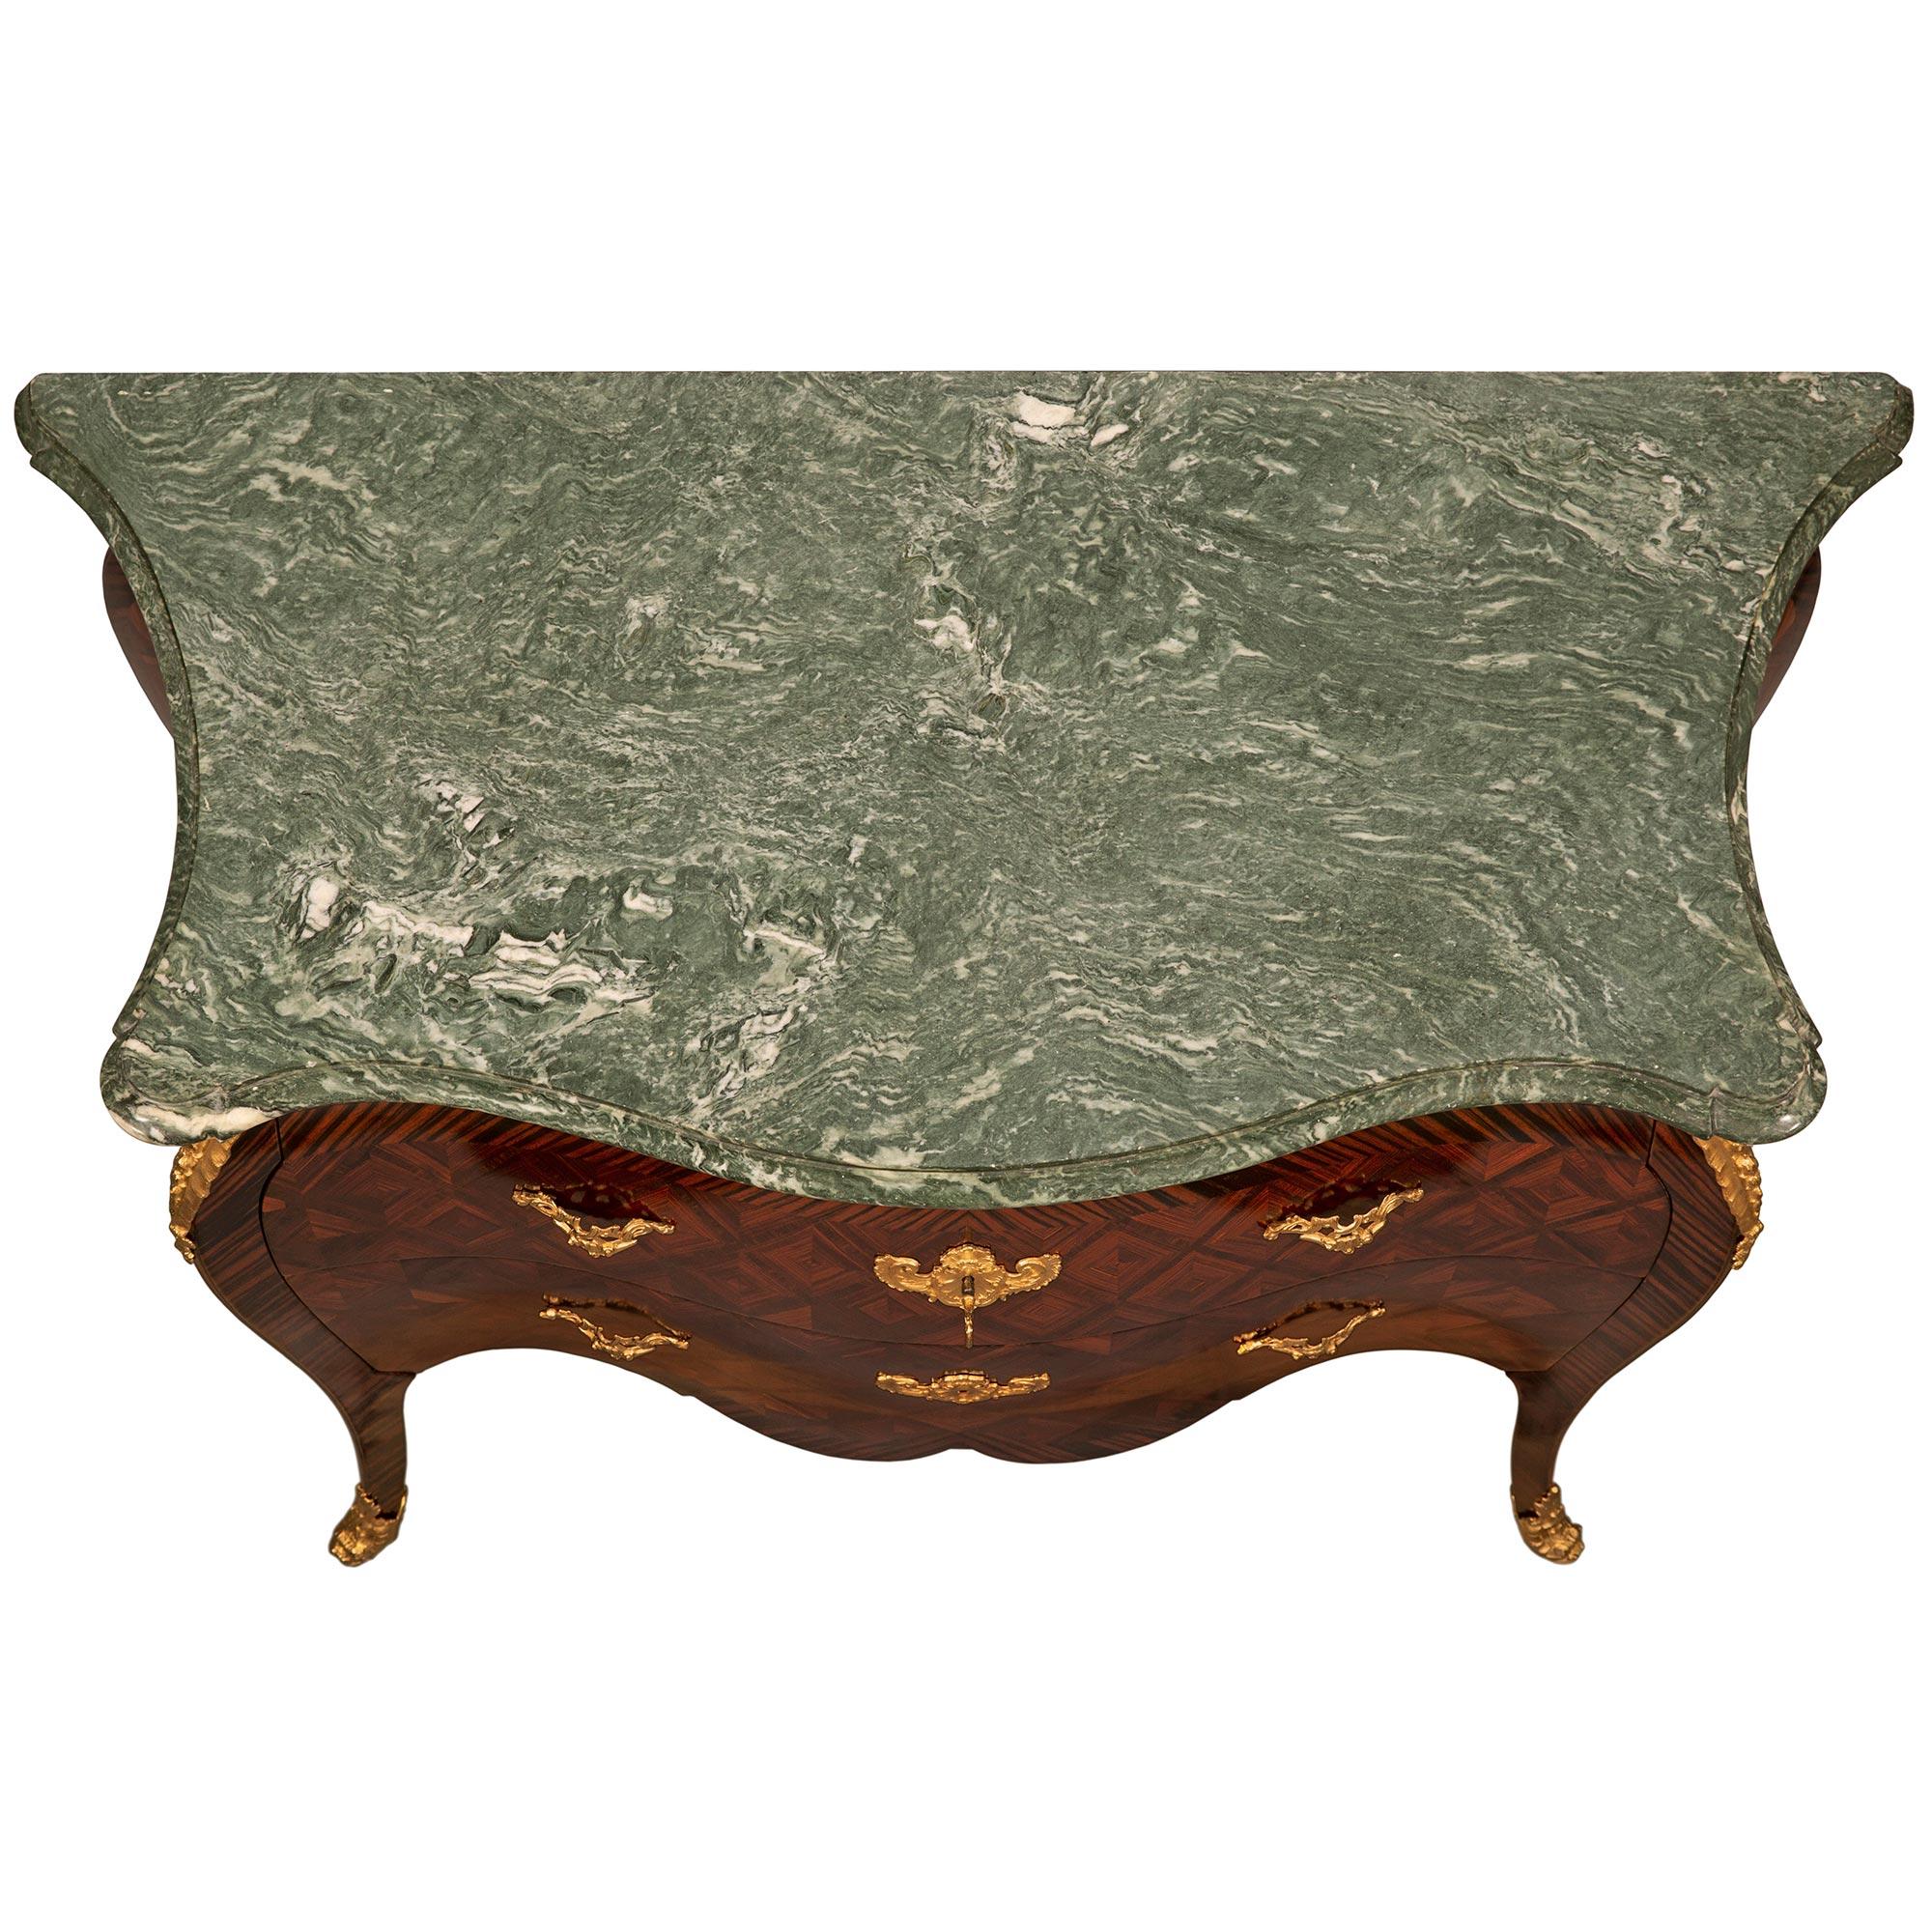 A stunning and most unique Italian 19th century Louis XV st. Rosewood, ormolu and Vert Turquin marble Roman commode. The three drawer chest is raised by elegant cabriole legs with fine fitted foliate ormolu sabots. At the center are two sans